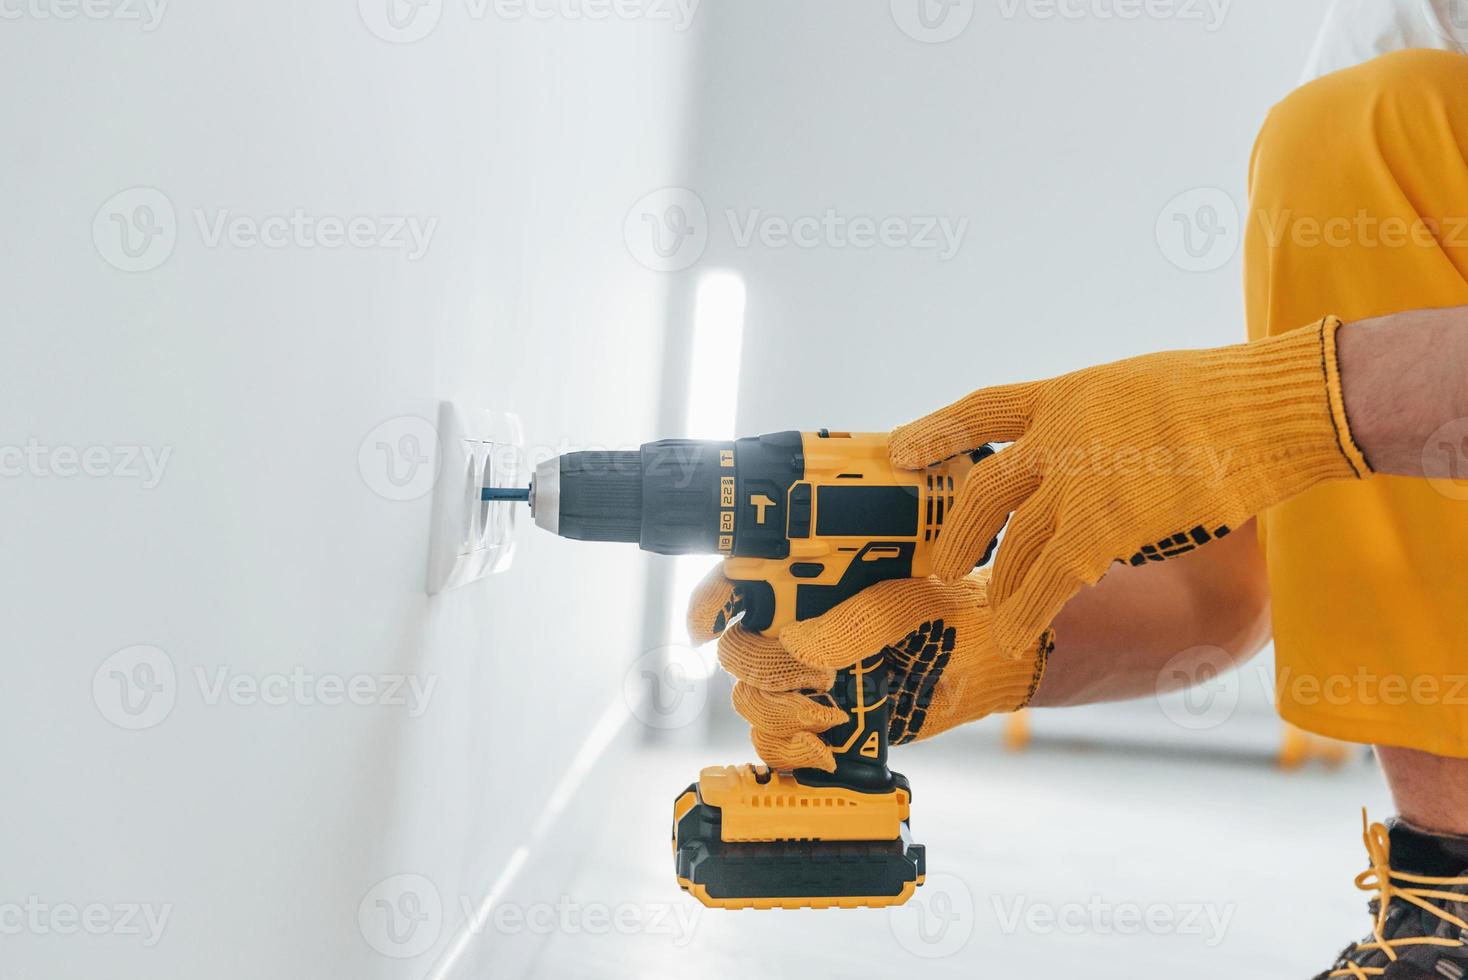 Handyman in yellow uniform works with electricity and installing new socket by using automatic screwdriver. House renovation conception photo